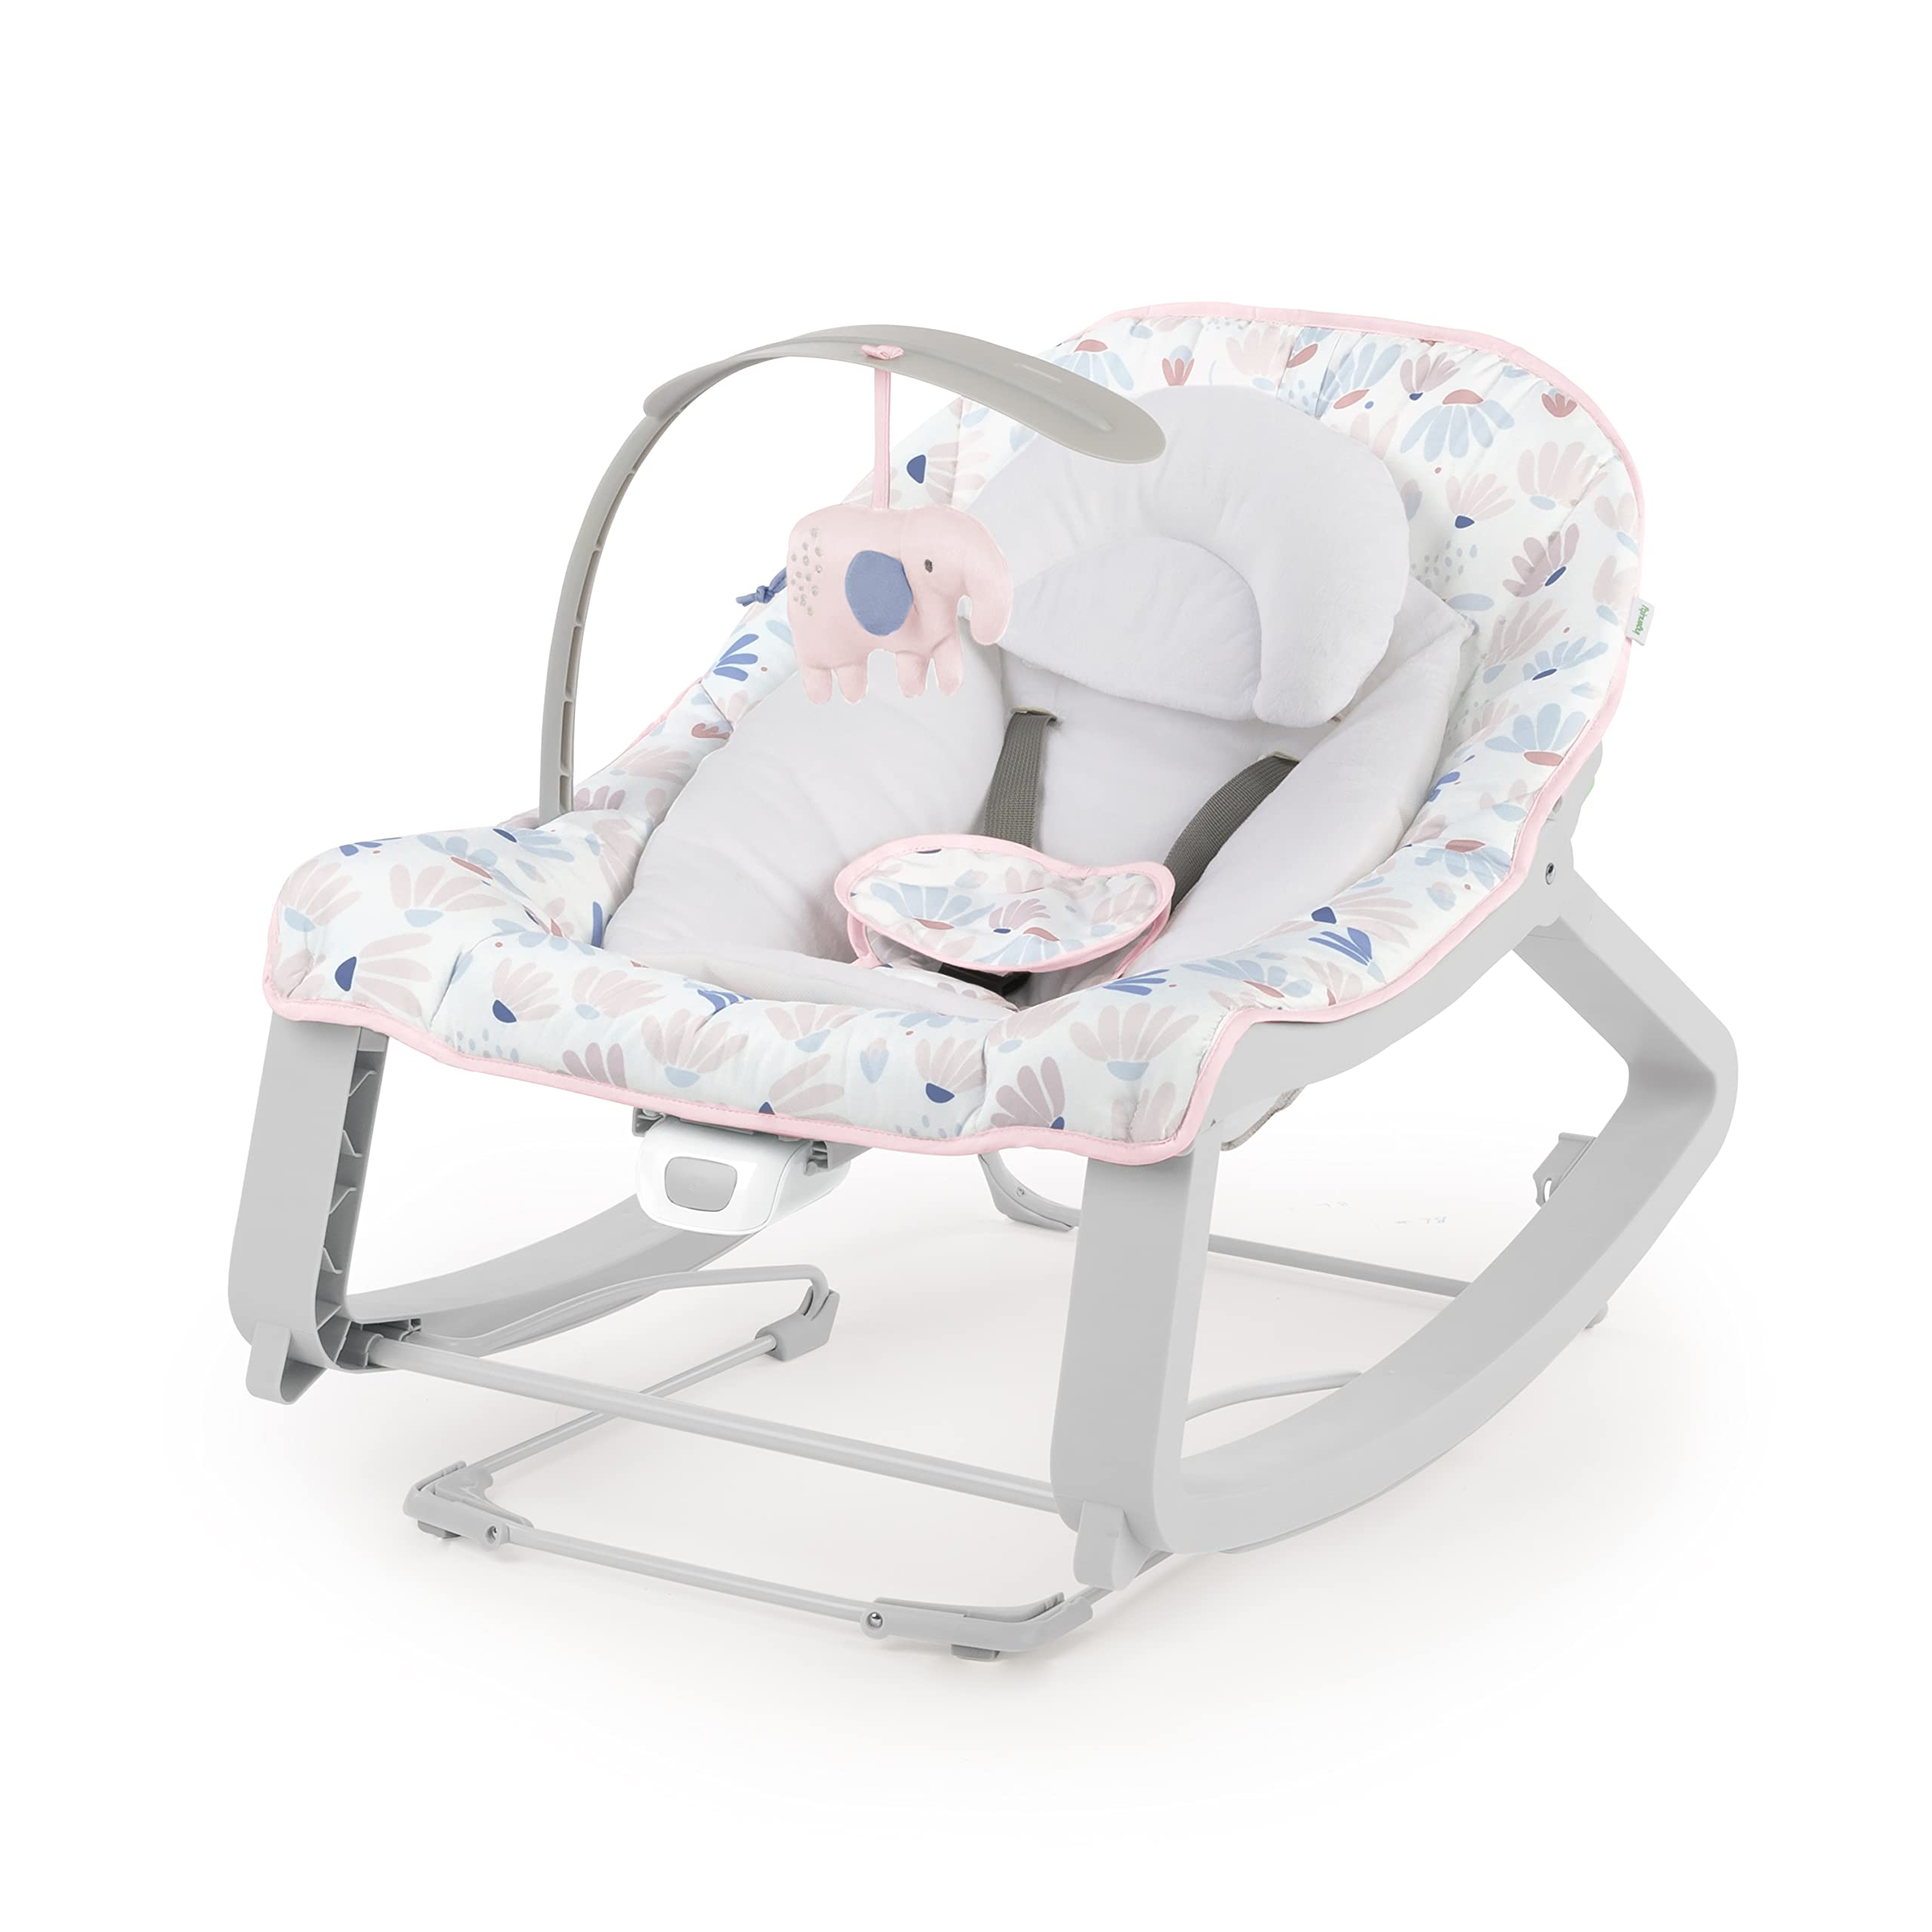 Ingenuity Keep cozy 3-in-1 grow with Me Vibrating Baby Bouncer Seat & Infant to Toddler Rocker - Burst (Pink), Newborn and up